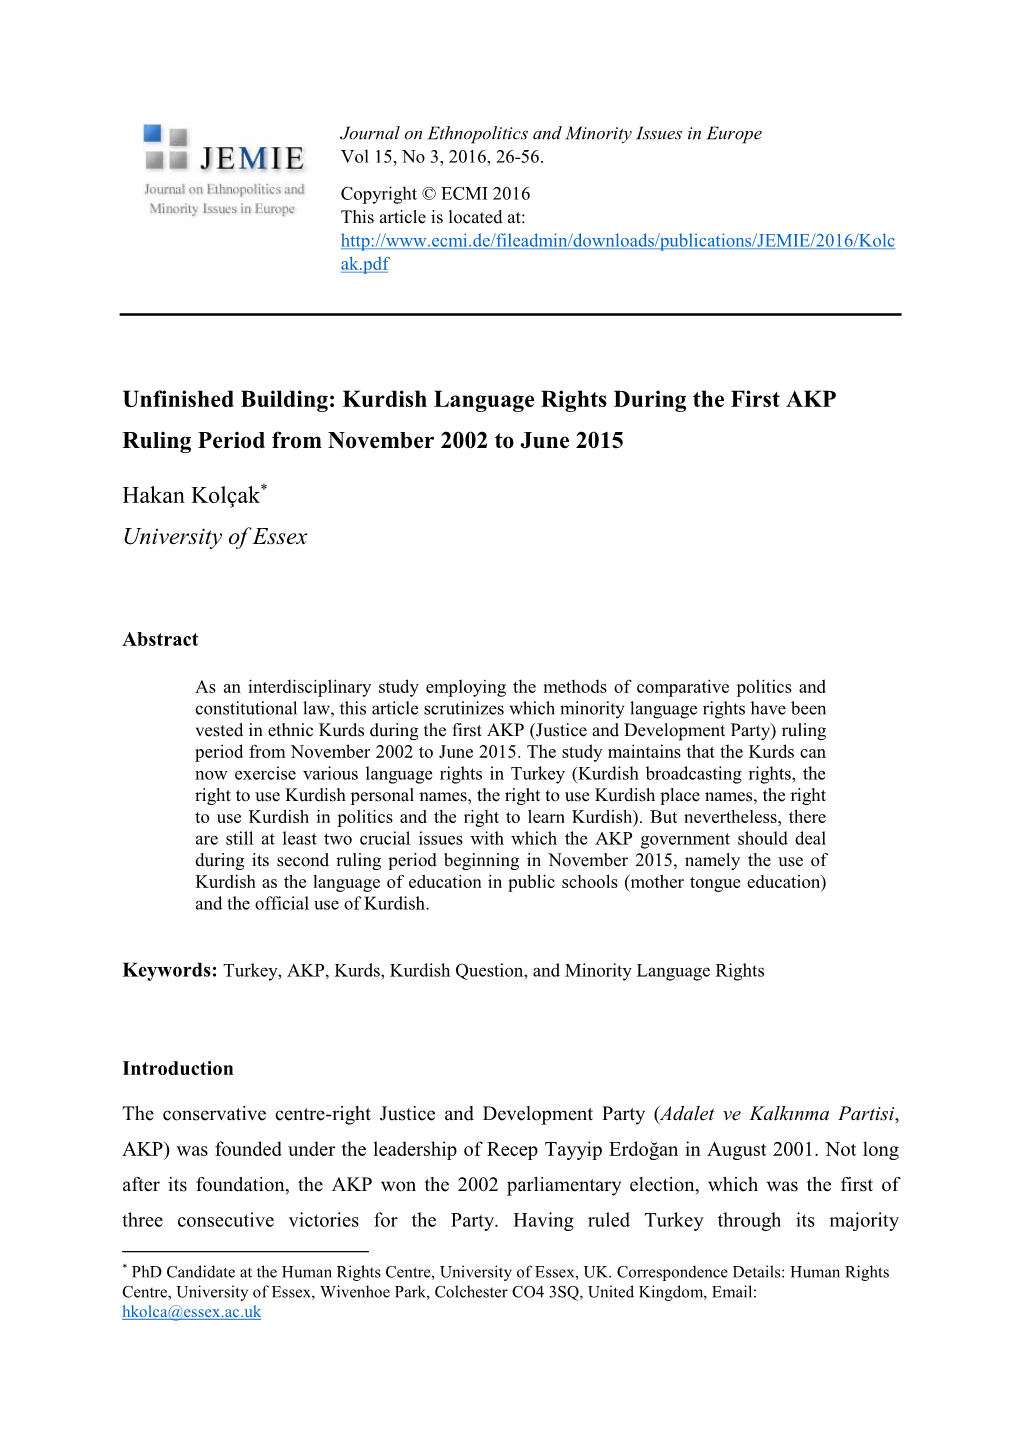 Unfinished Building: Kurdish Language Rights During the First AKP Ruling Period from November 2002 to June 2015